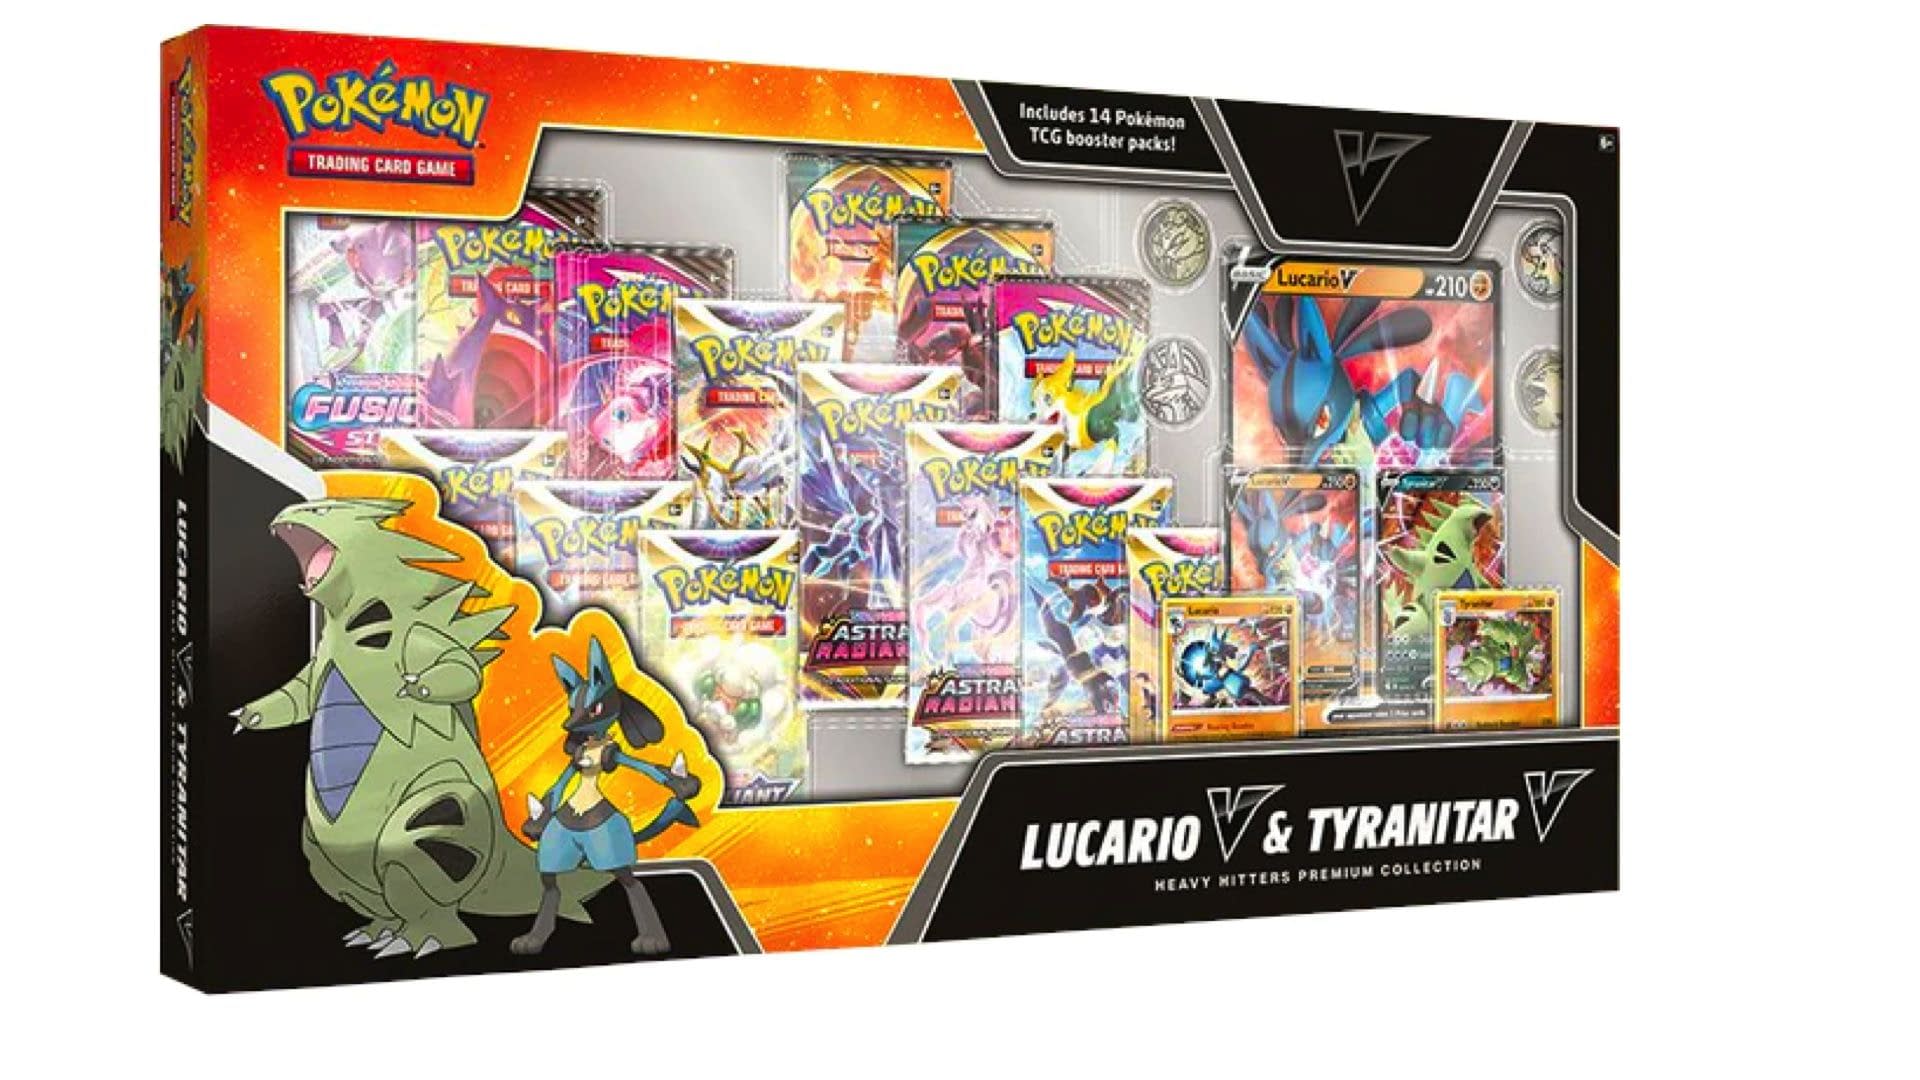 Pokémon TCG Heavy Hitters Collection is Out Today